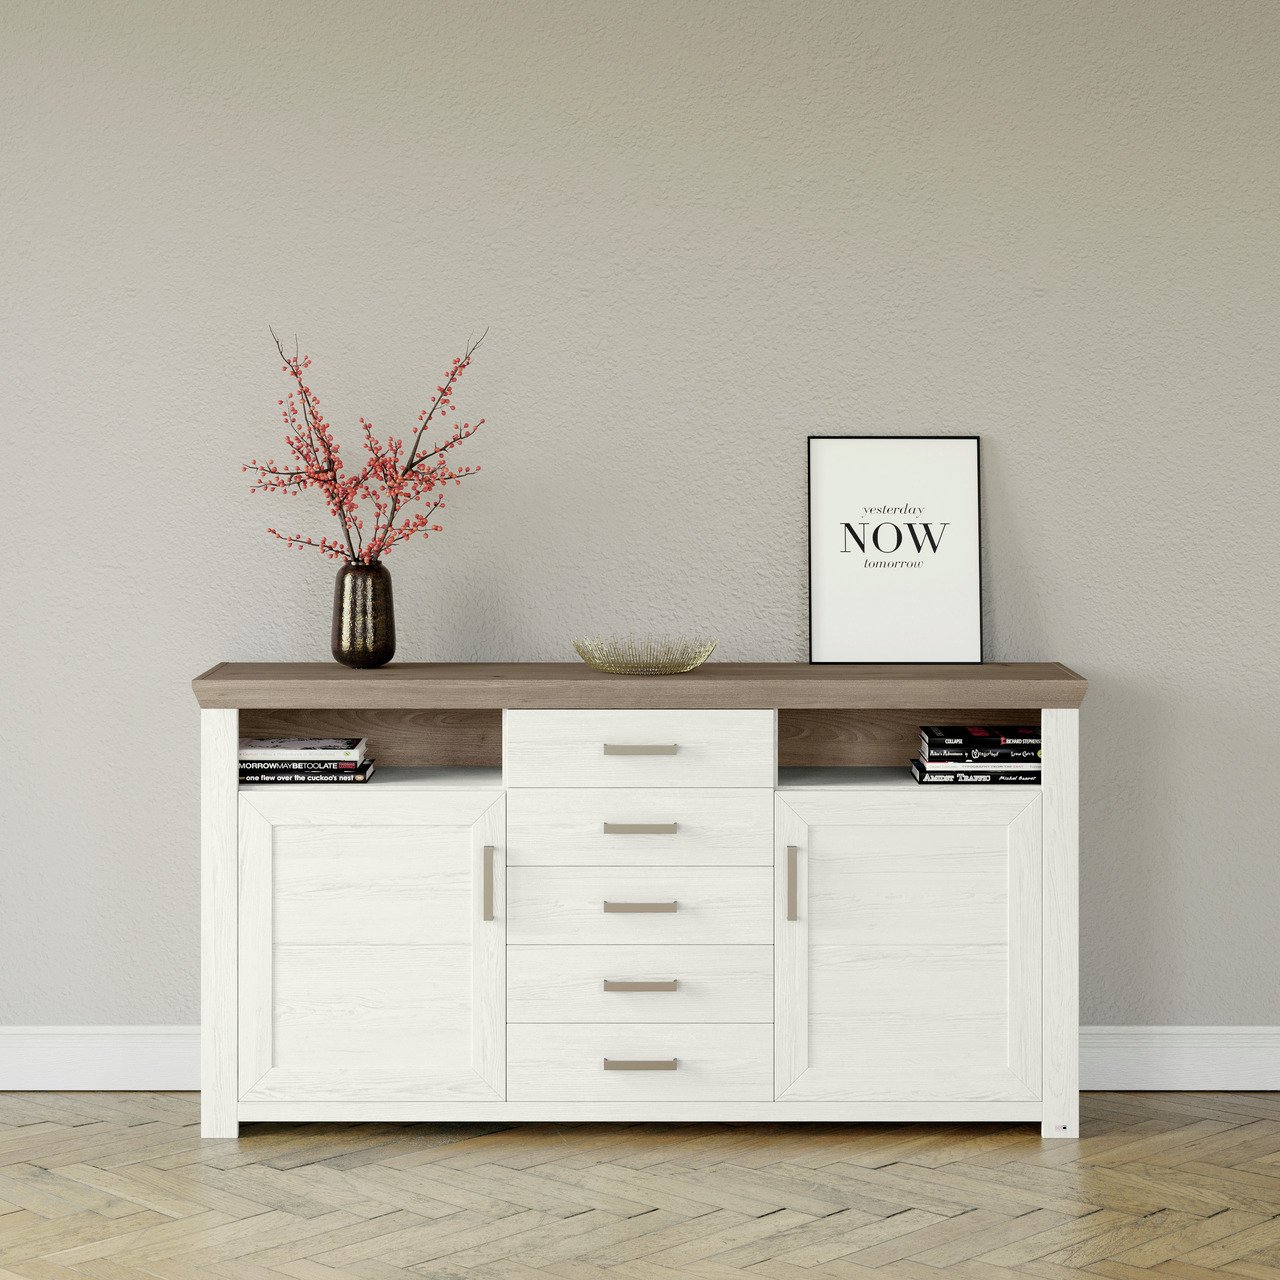 Set one SET by ONE 0977108 | YORK Musterring Sideboard